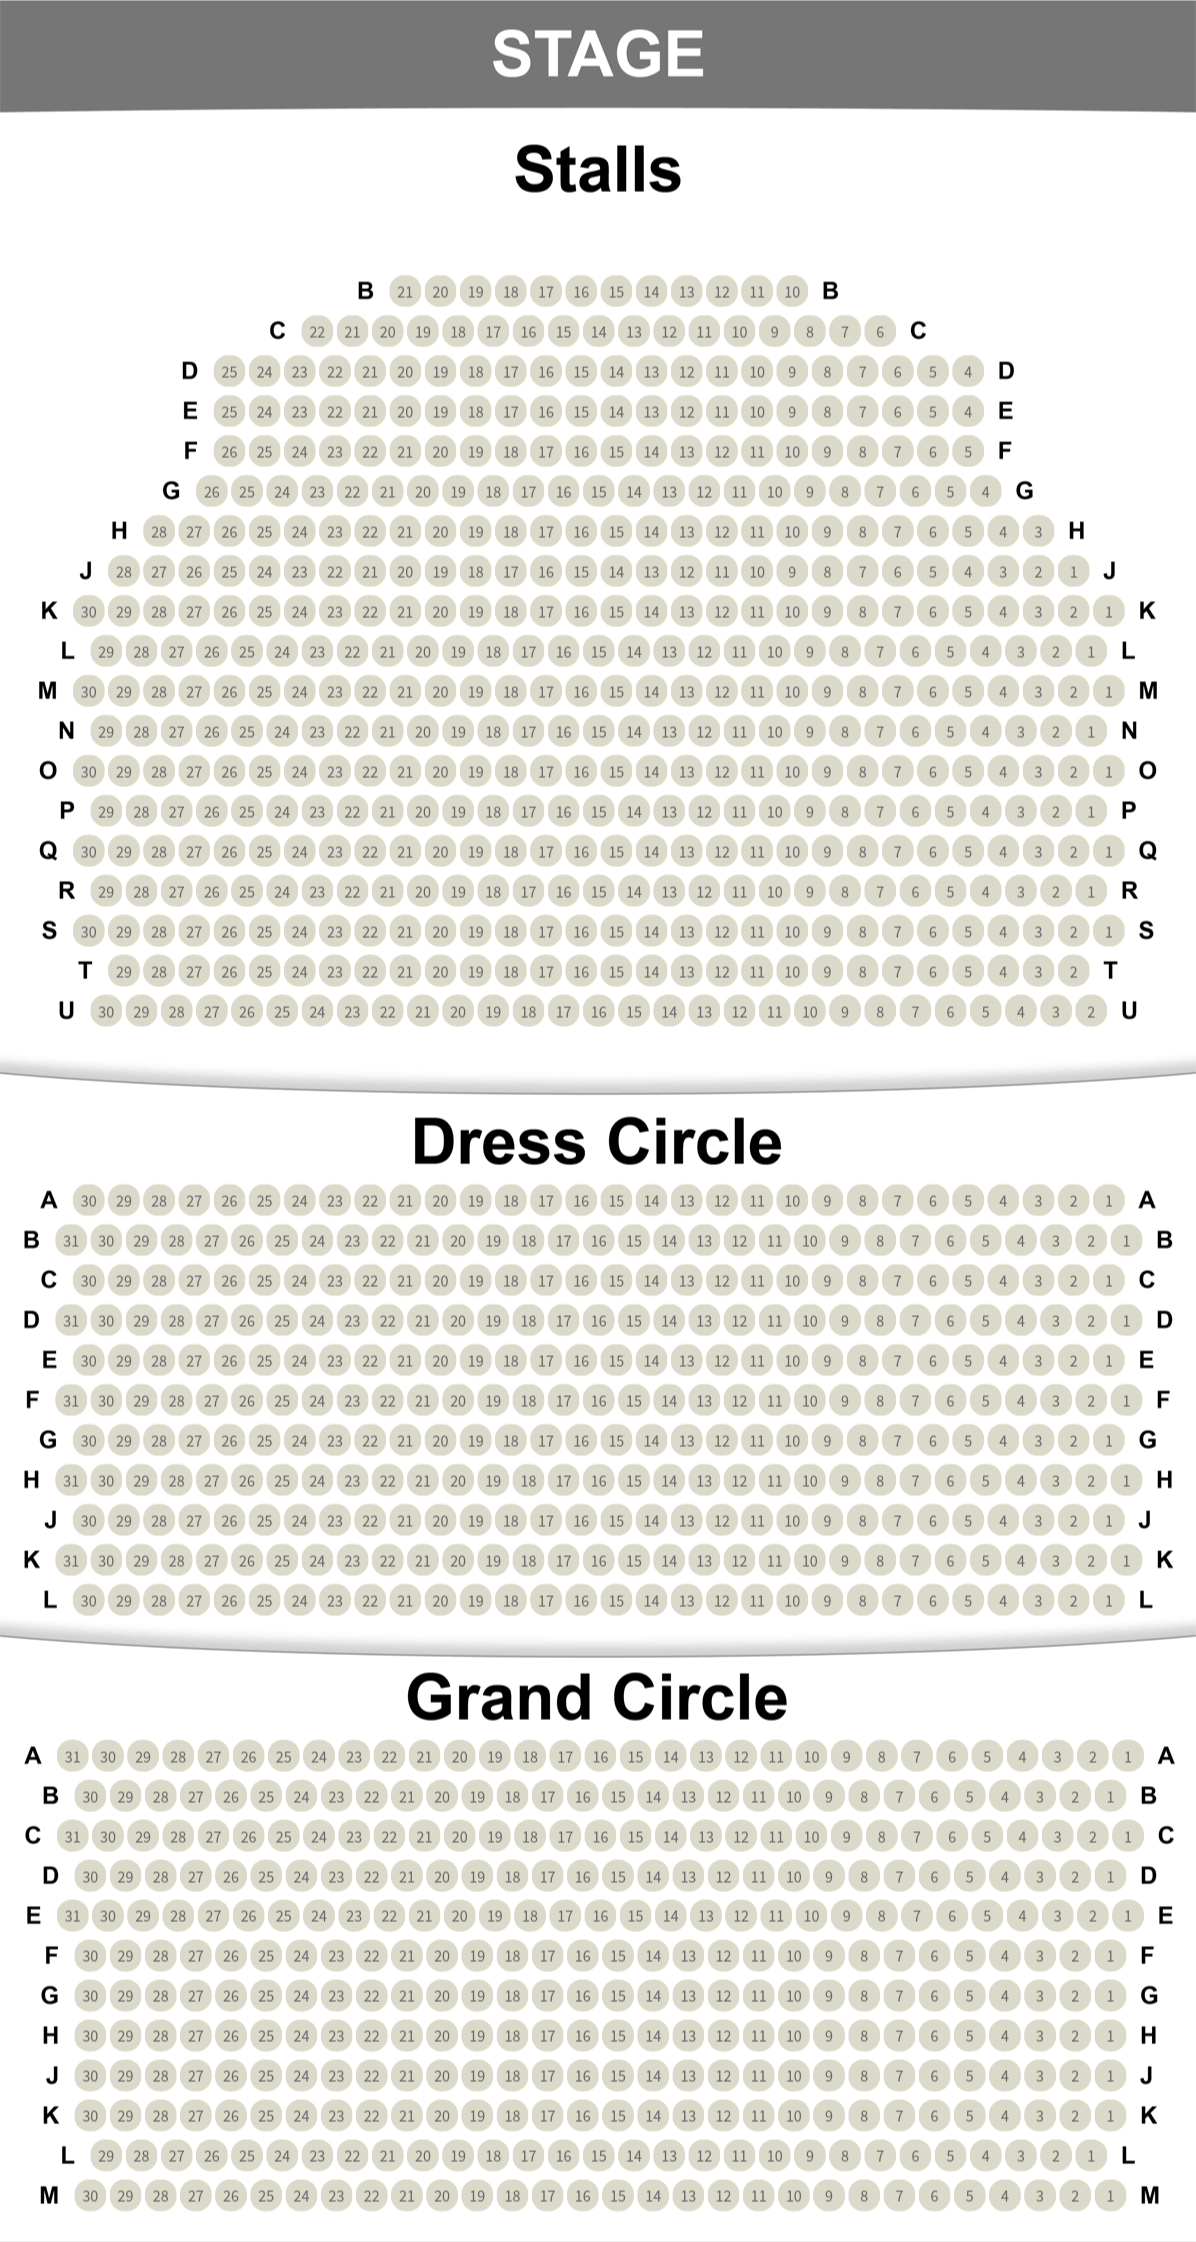 Piccadilly Theatre seating plan